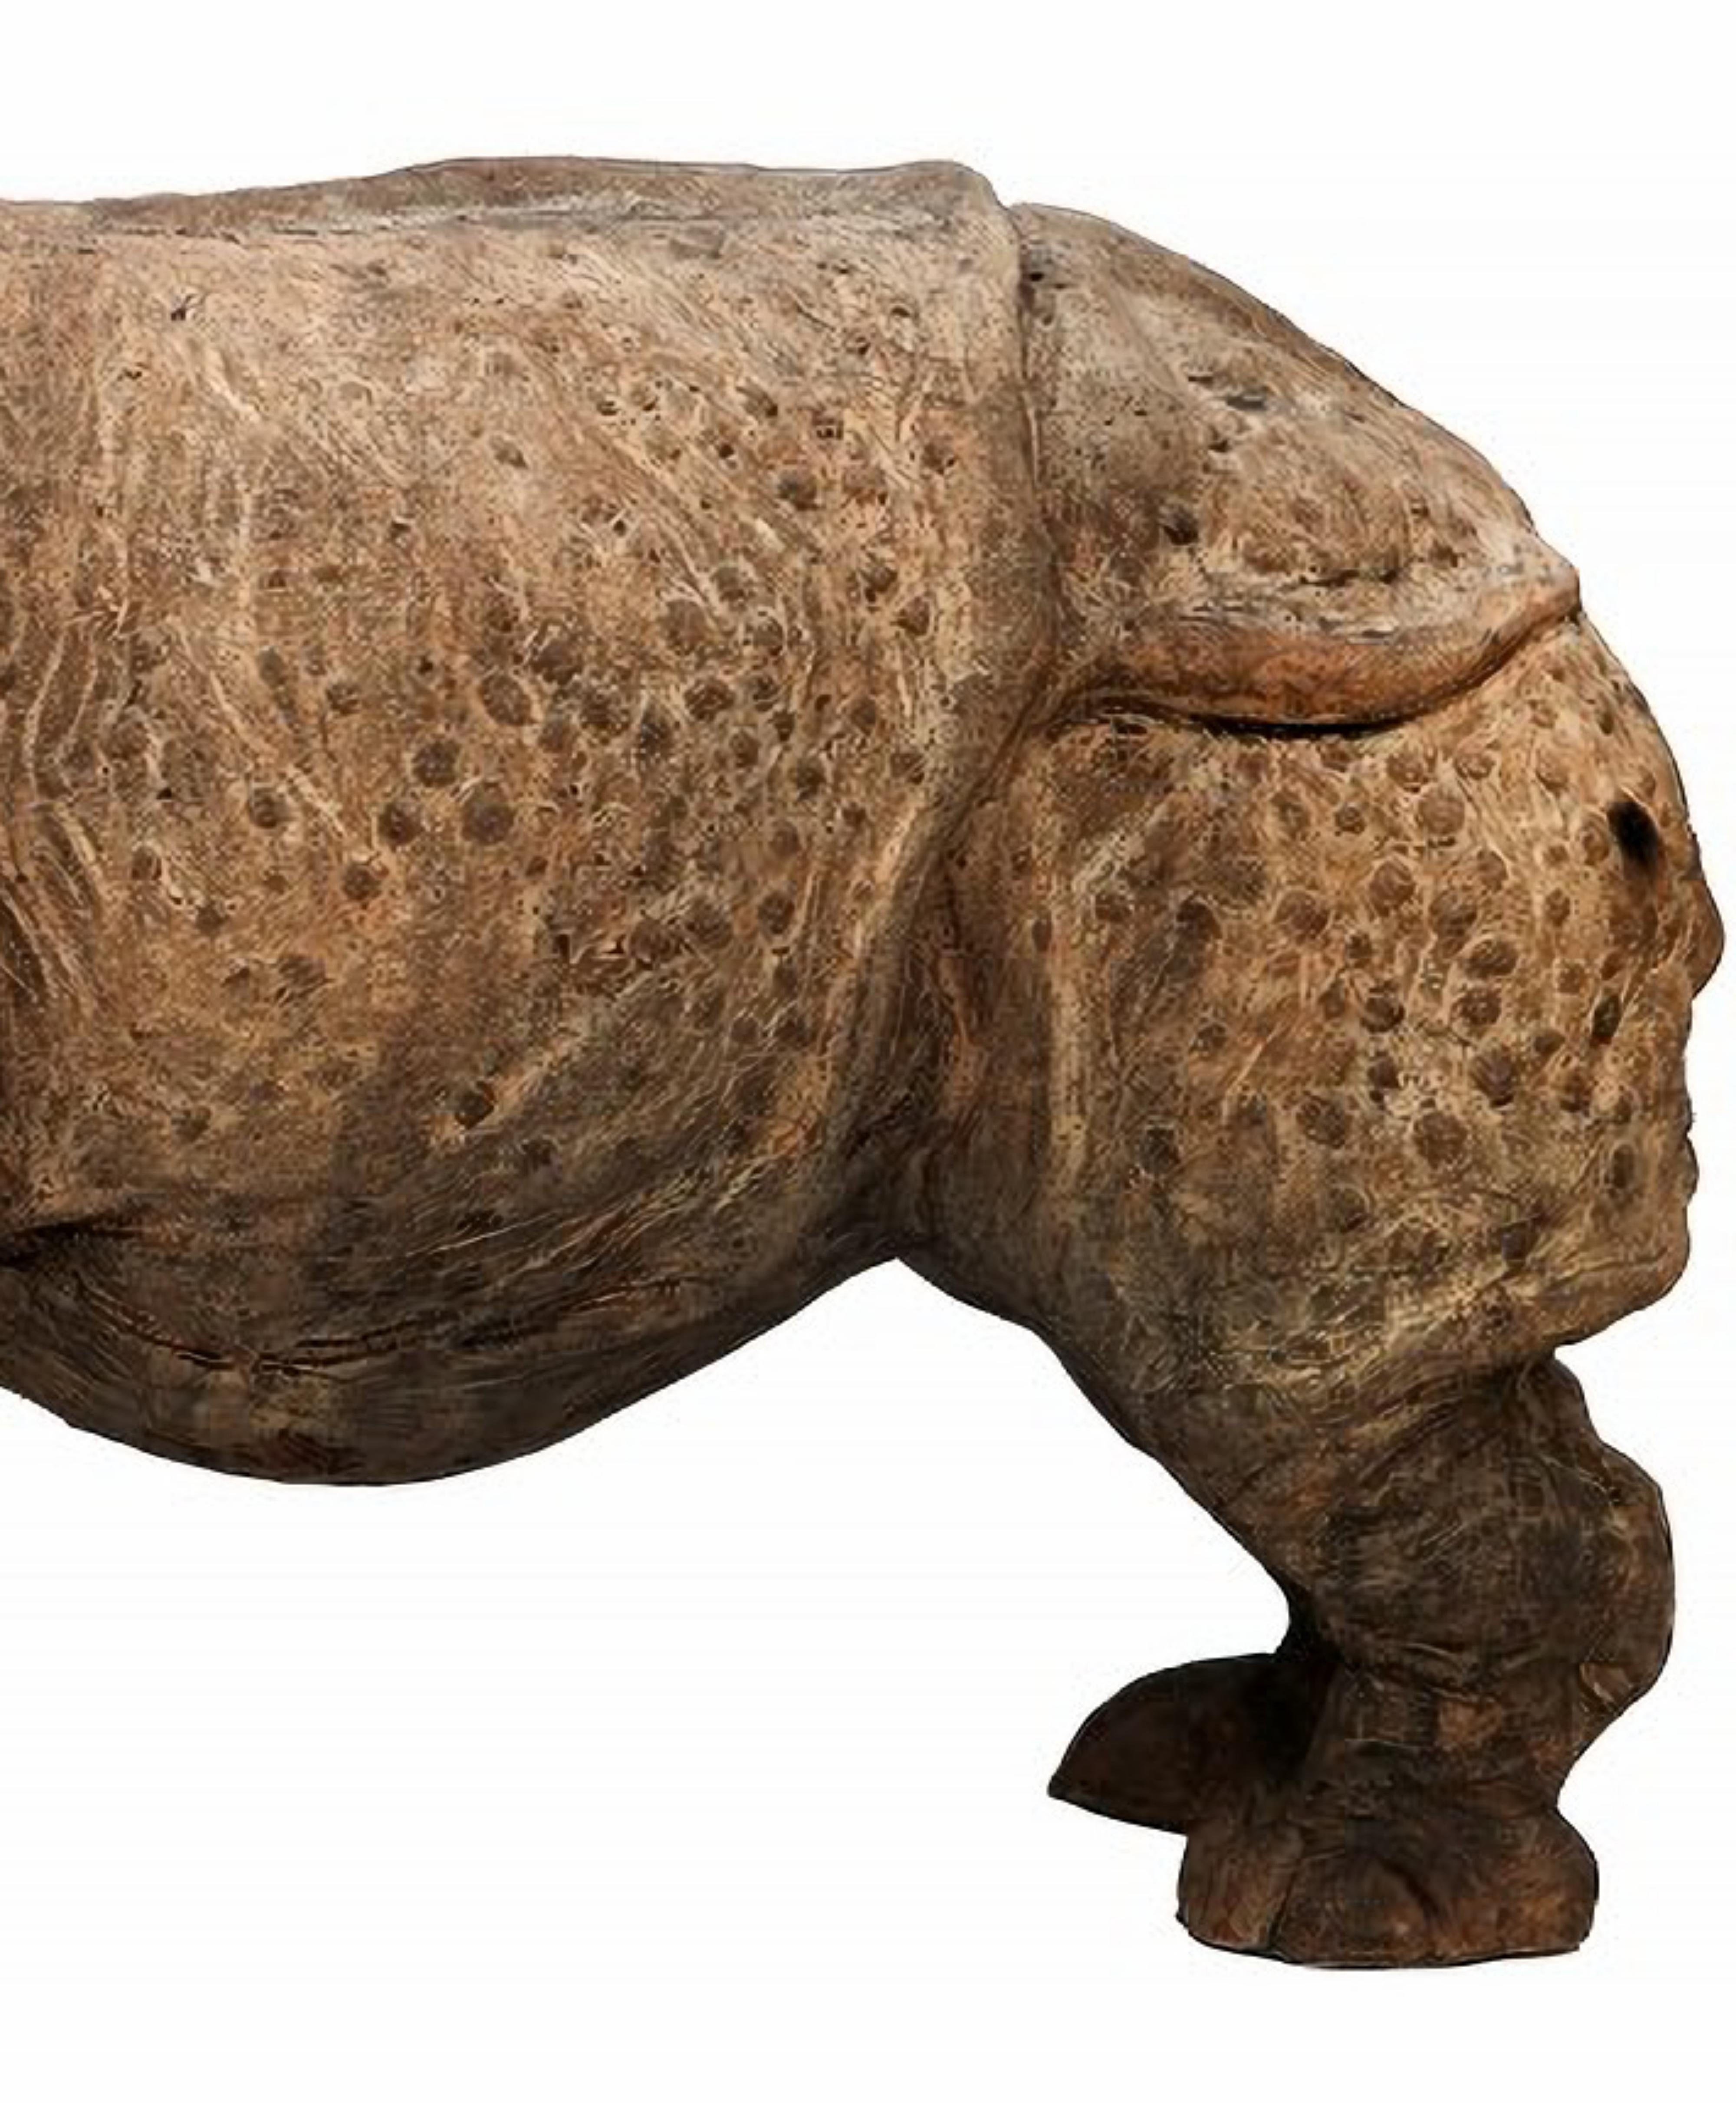 THE INDIAN TUSCANY TERRACOTTA RHINO FROM ASSAM 20th Century
Florence - Italy
Typical Indian Rhinoceros from Assam.
HEIGHT 35 cm
WIDTH 27 cm
LENGTH 37 cm
WEIGHT 15 Kg
MATERIAL Terracotta